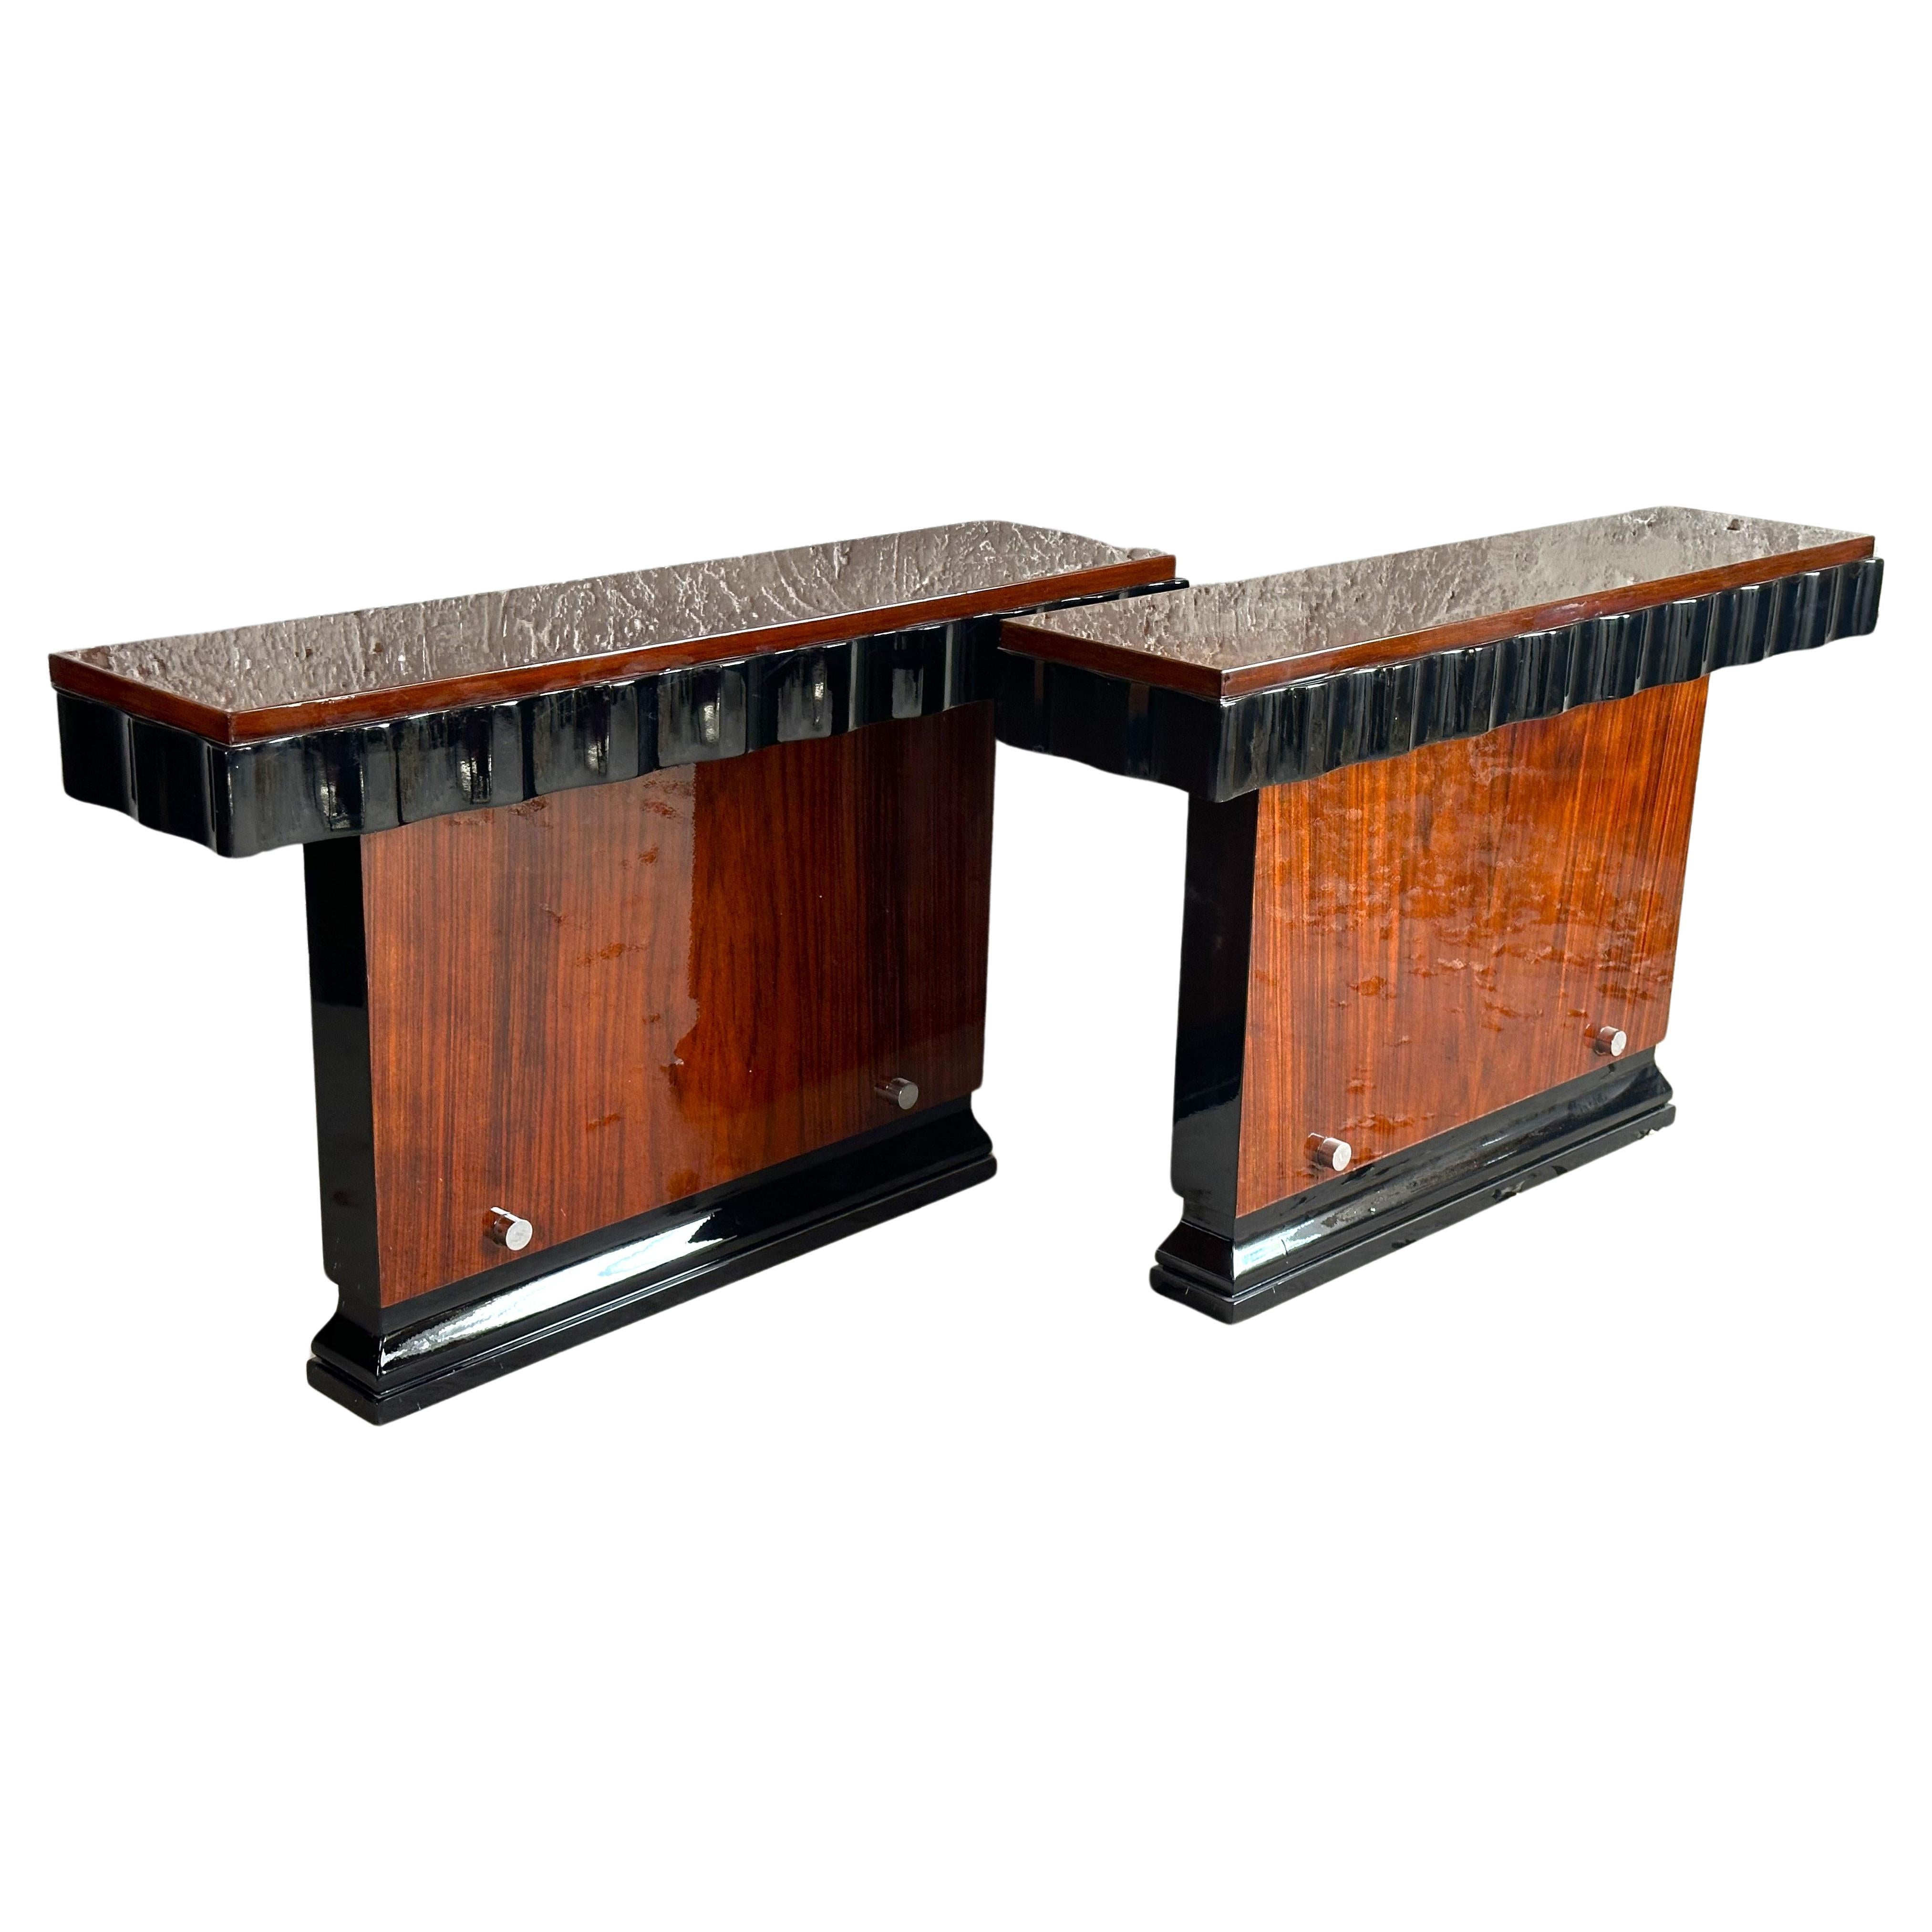 Art Deco Modernist Pair of Console Tables by Kristian Krass, France 1935